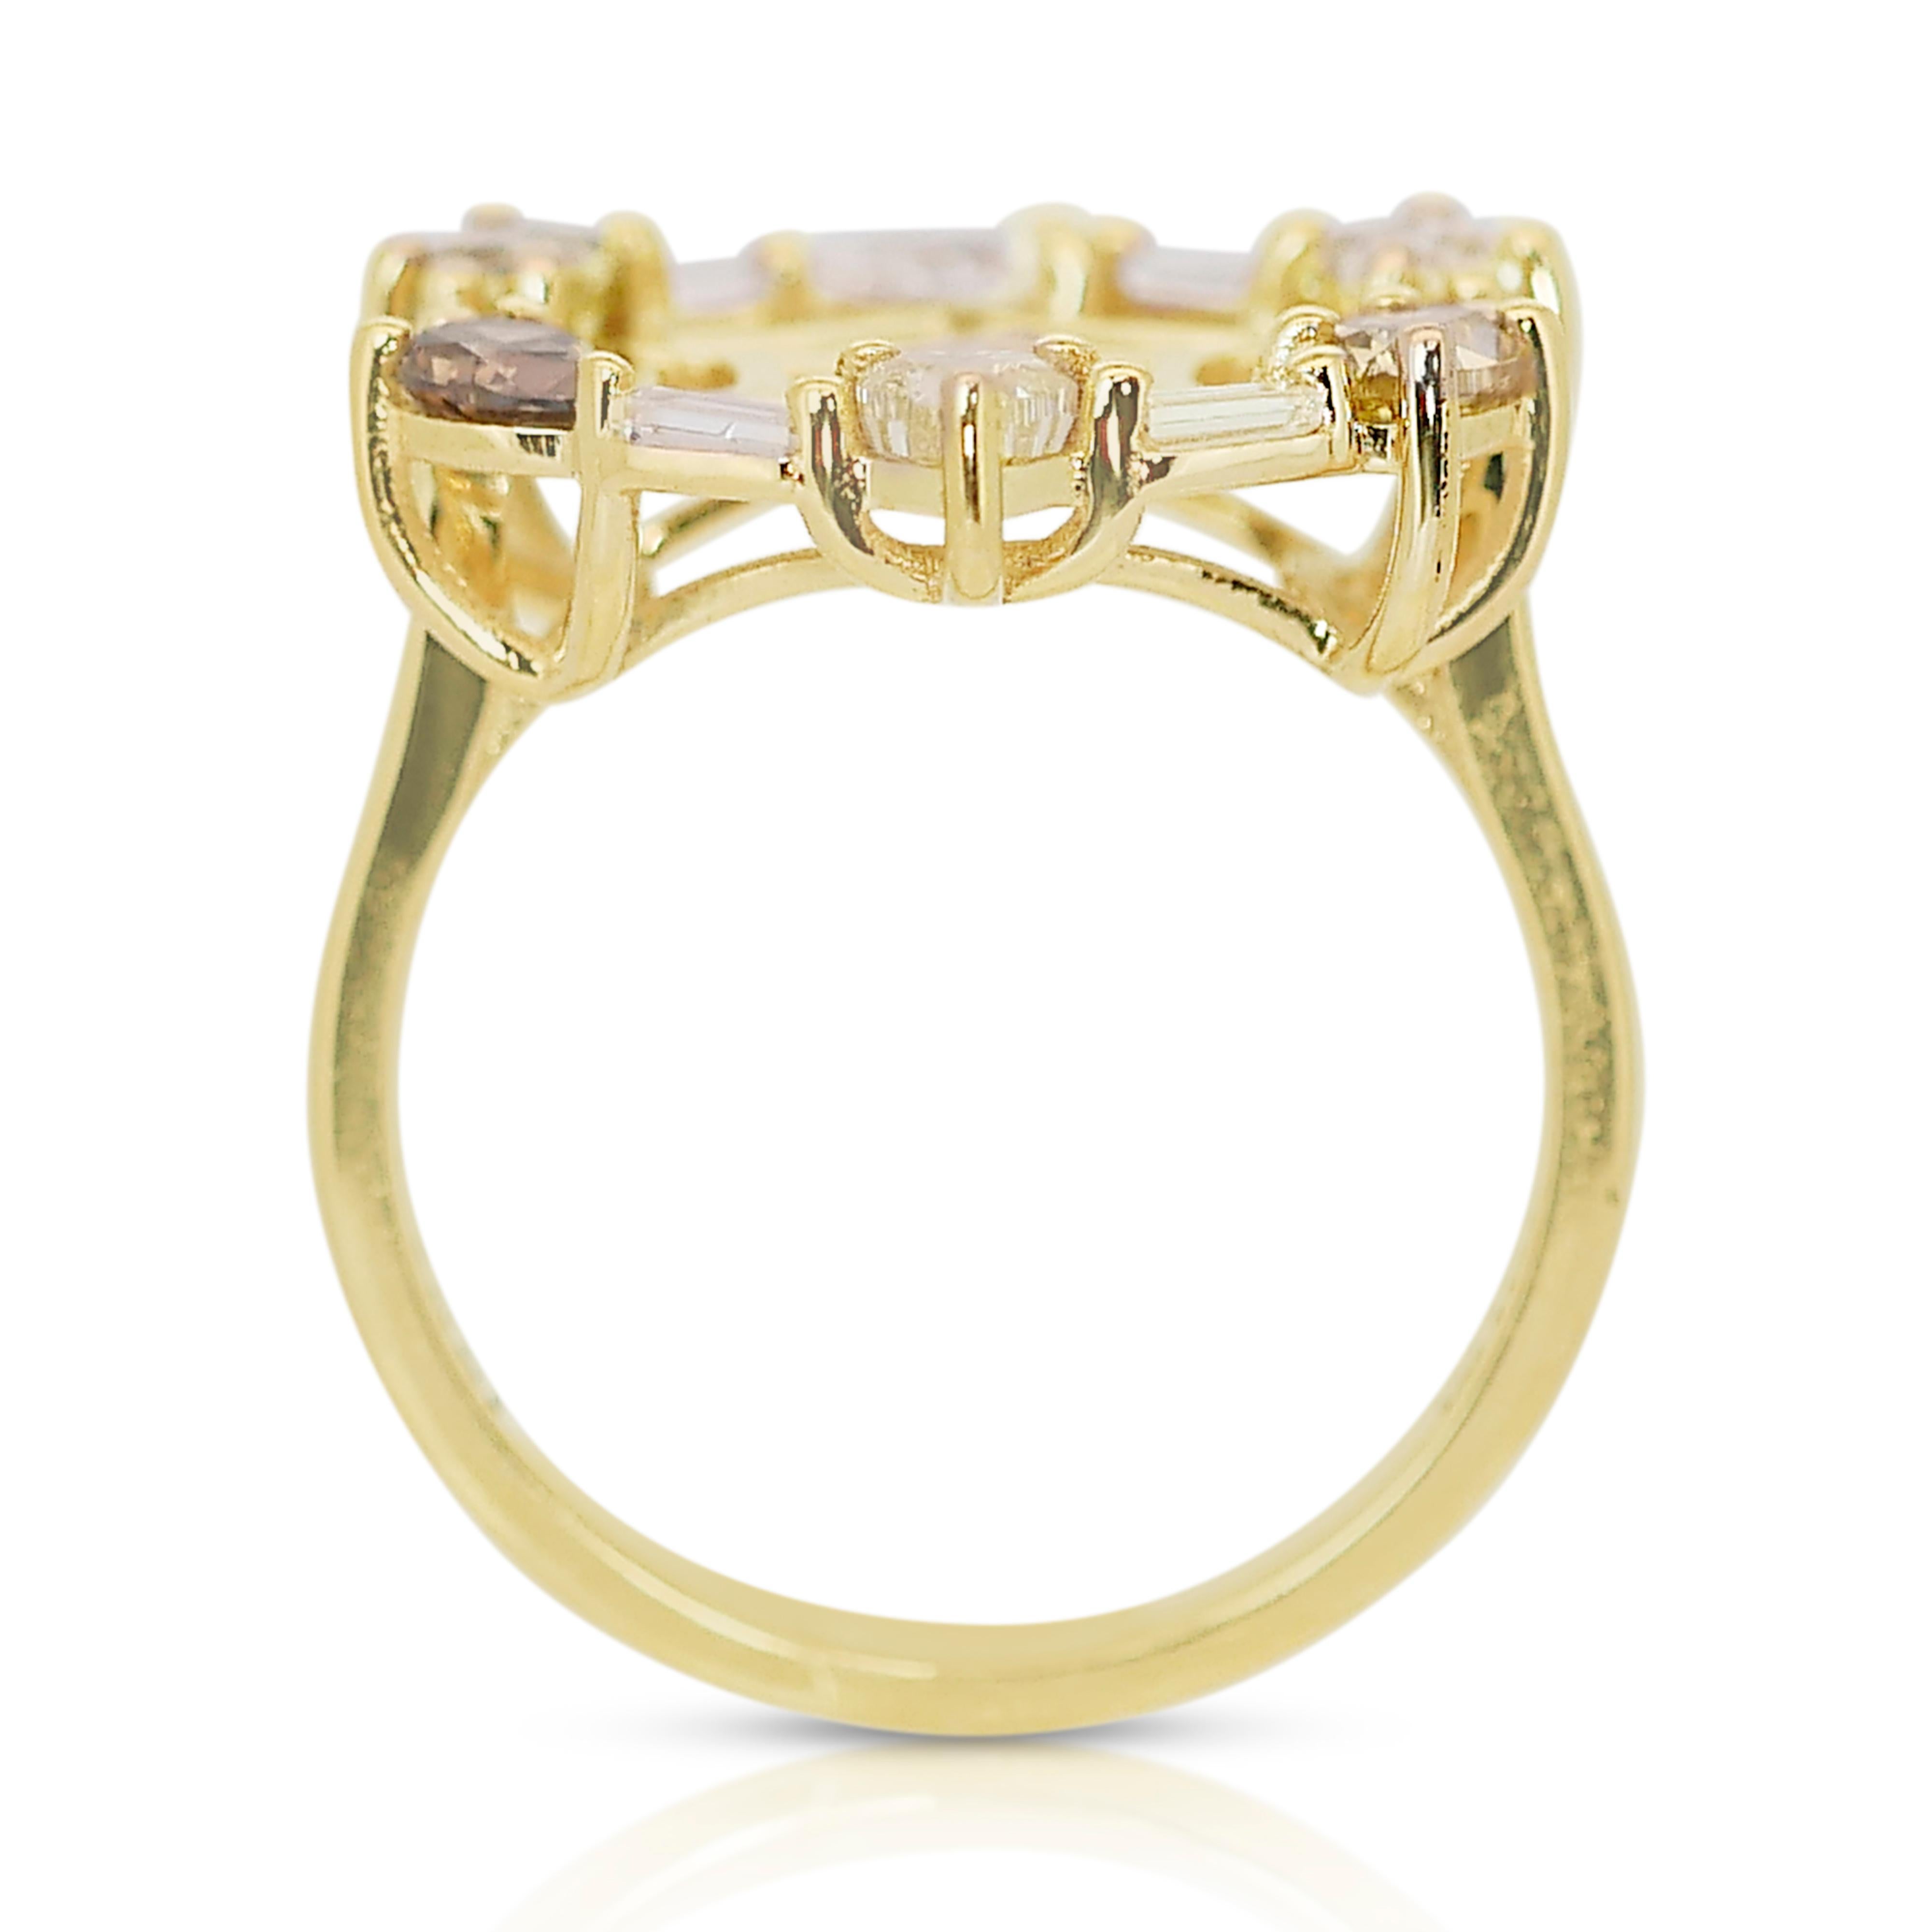 Stylish 1.34ct Diamonds Fancy-Colored Ring in 18k Yellow Gold - IGI Certified 2